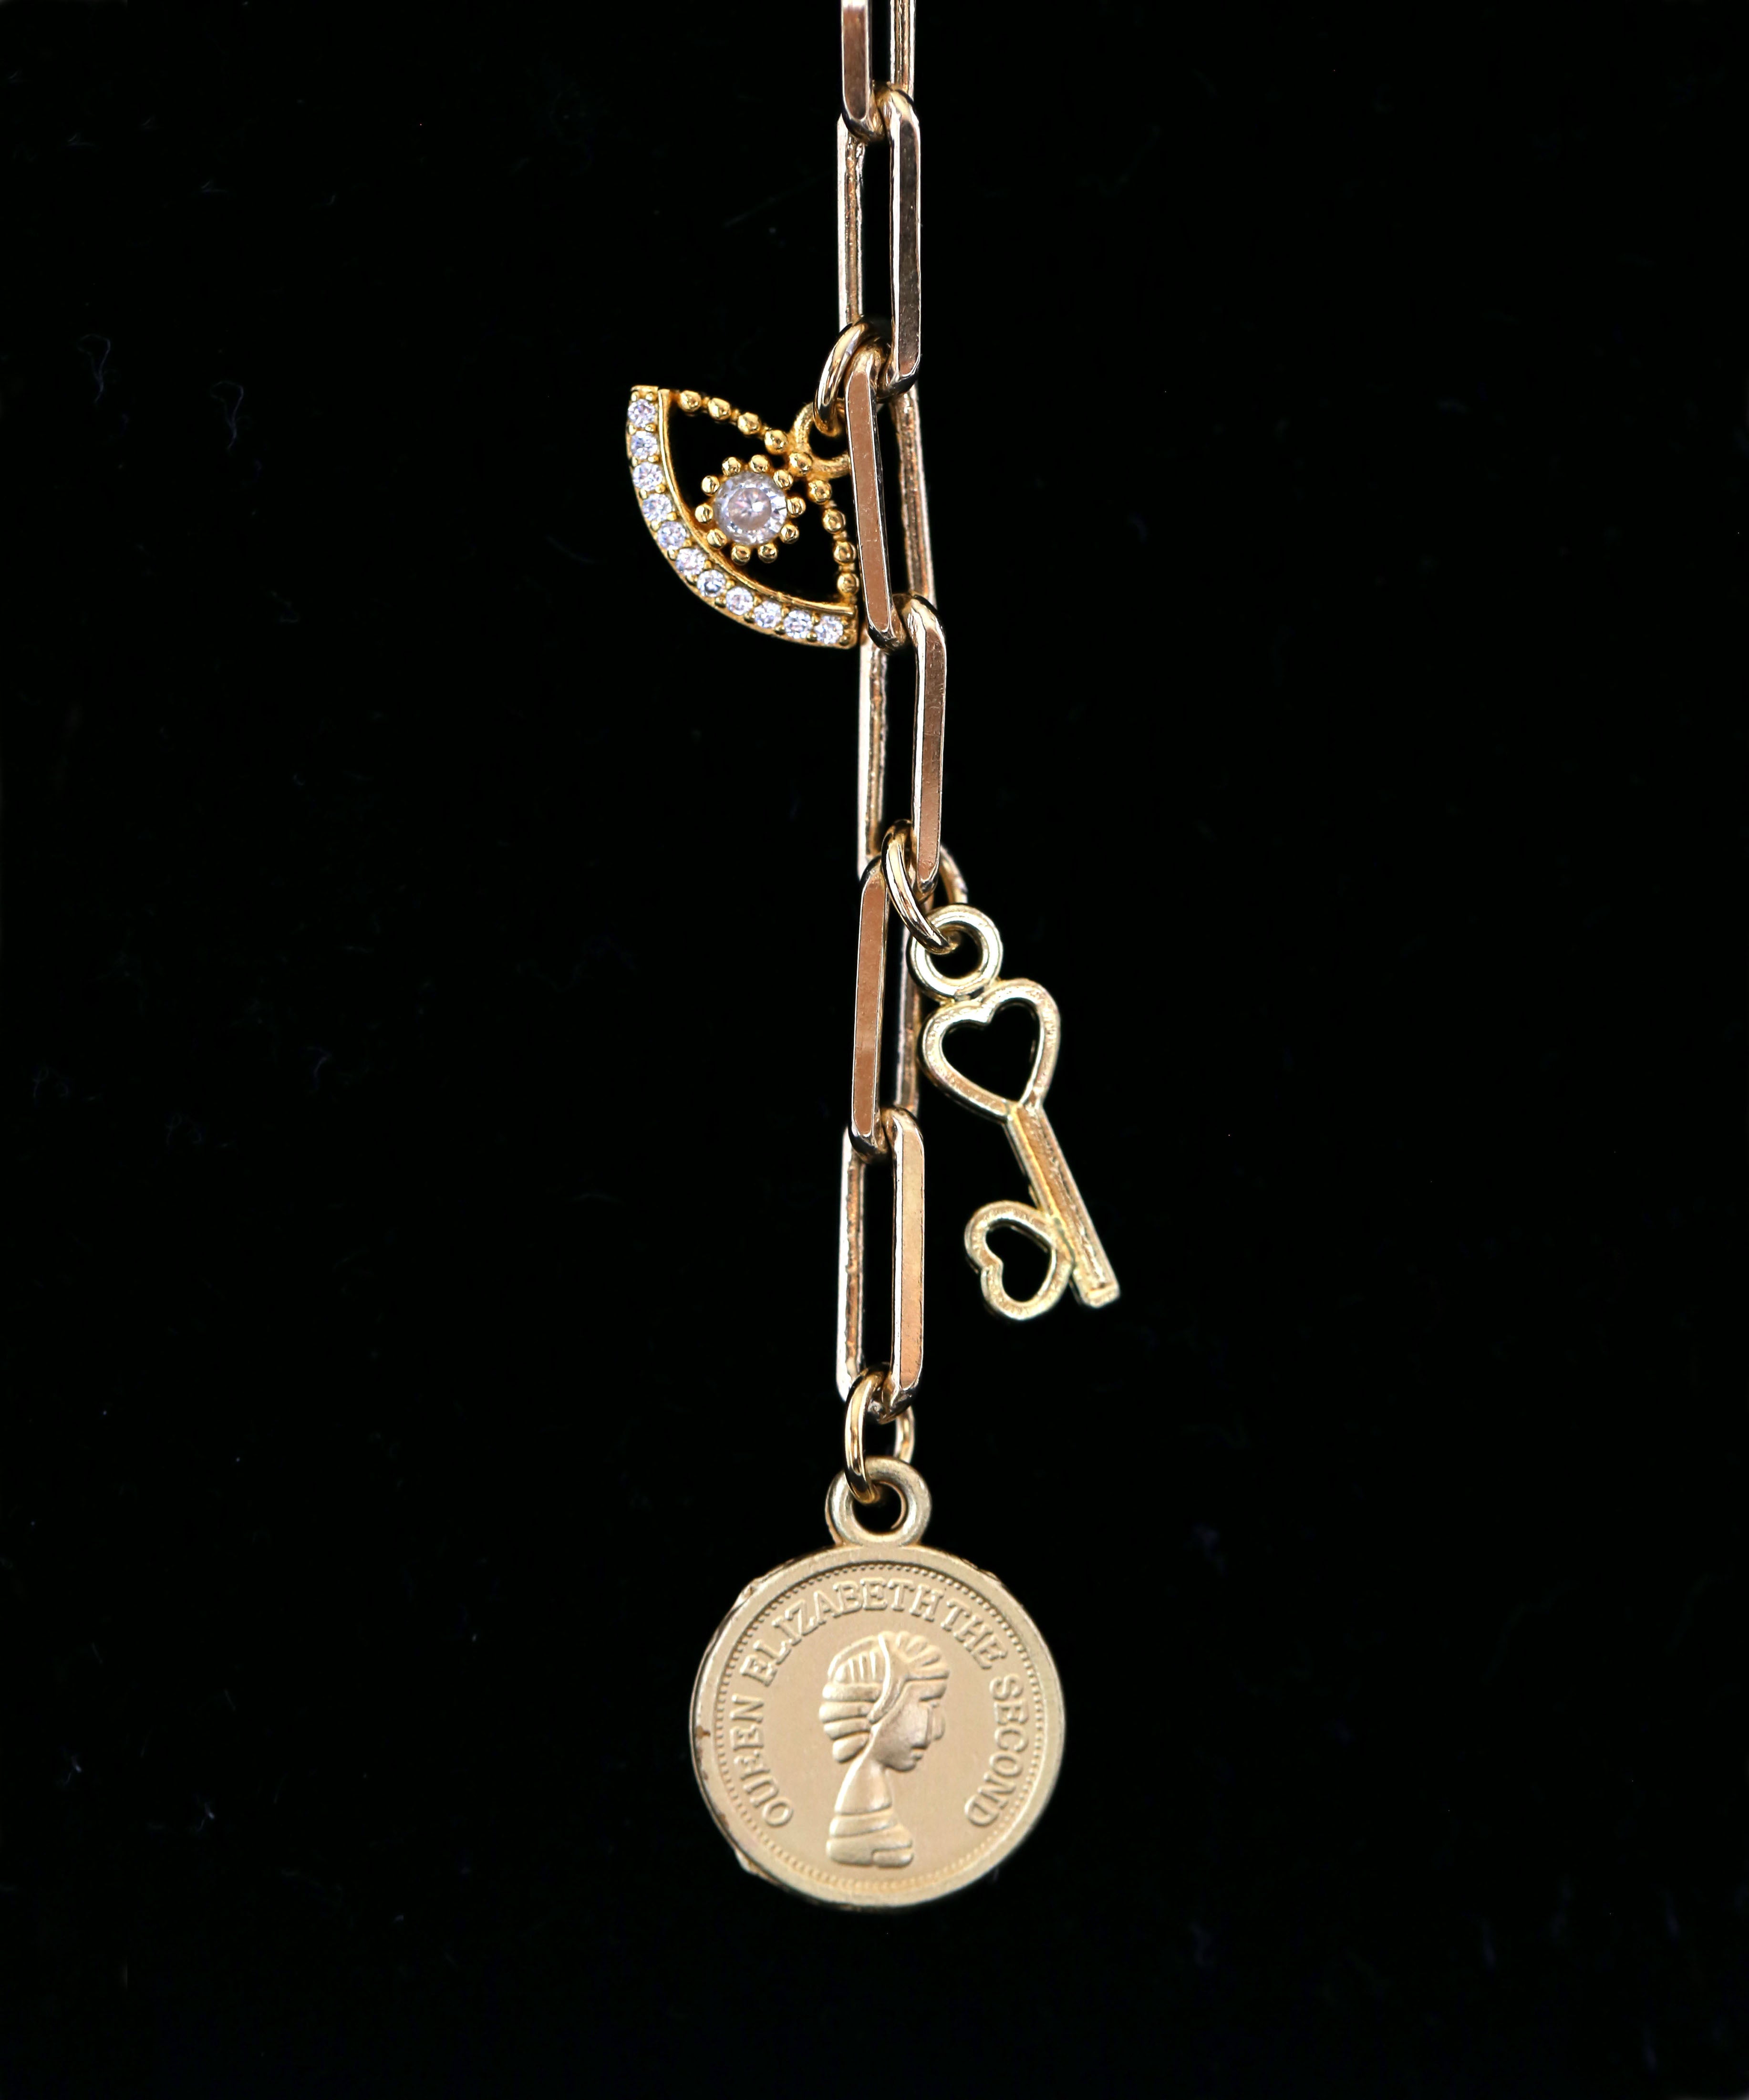 Gold Filled Paperclip Link Chain with Coins, Evil Eye, Key Charms